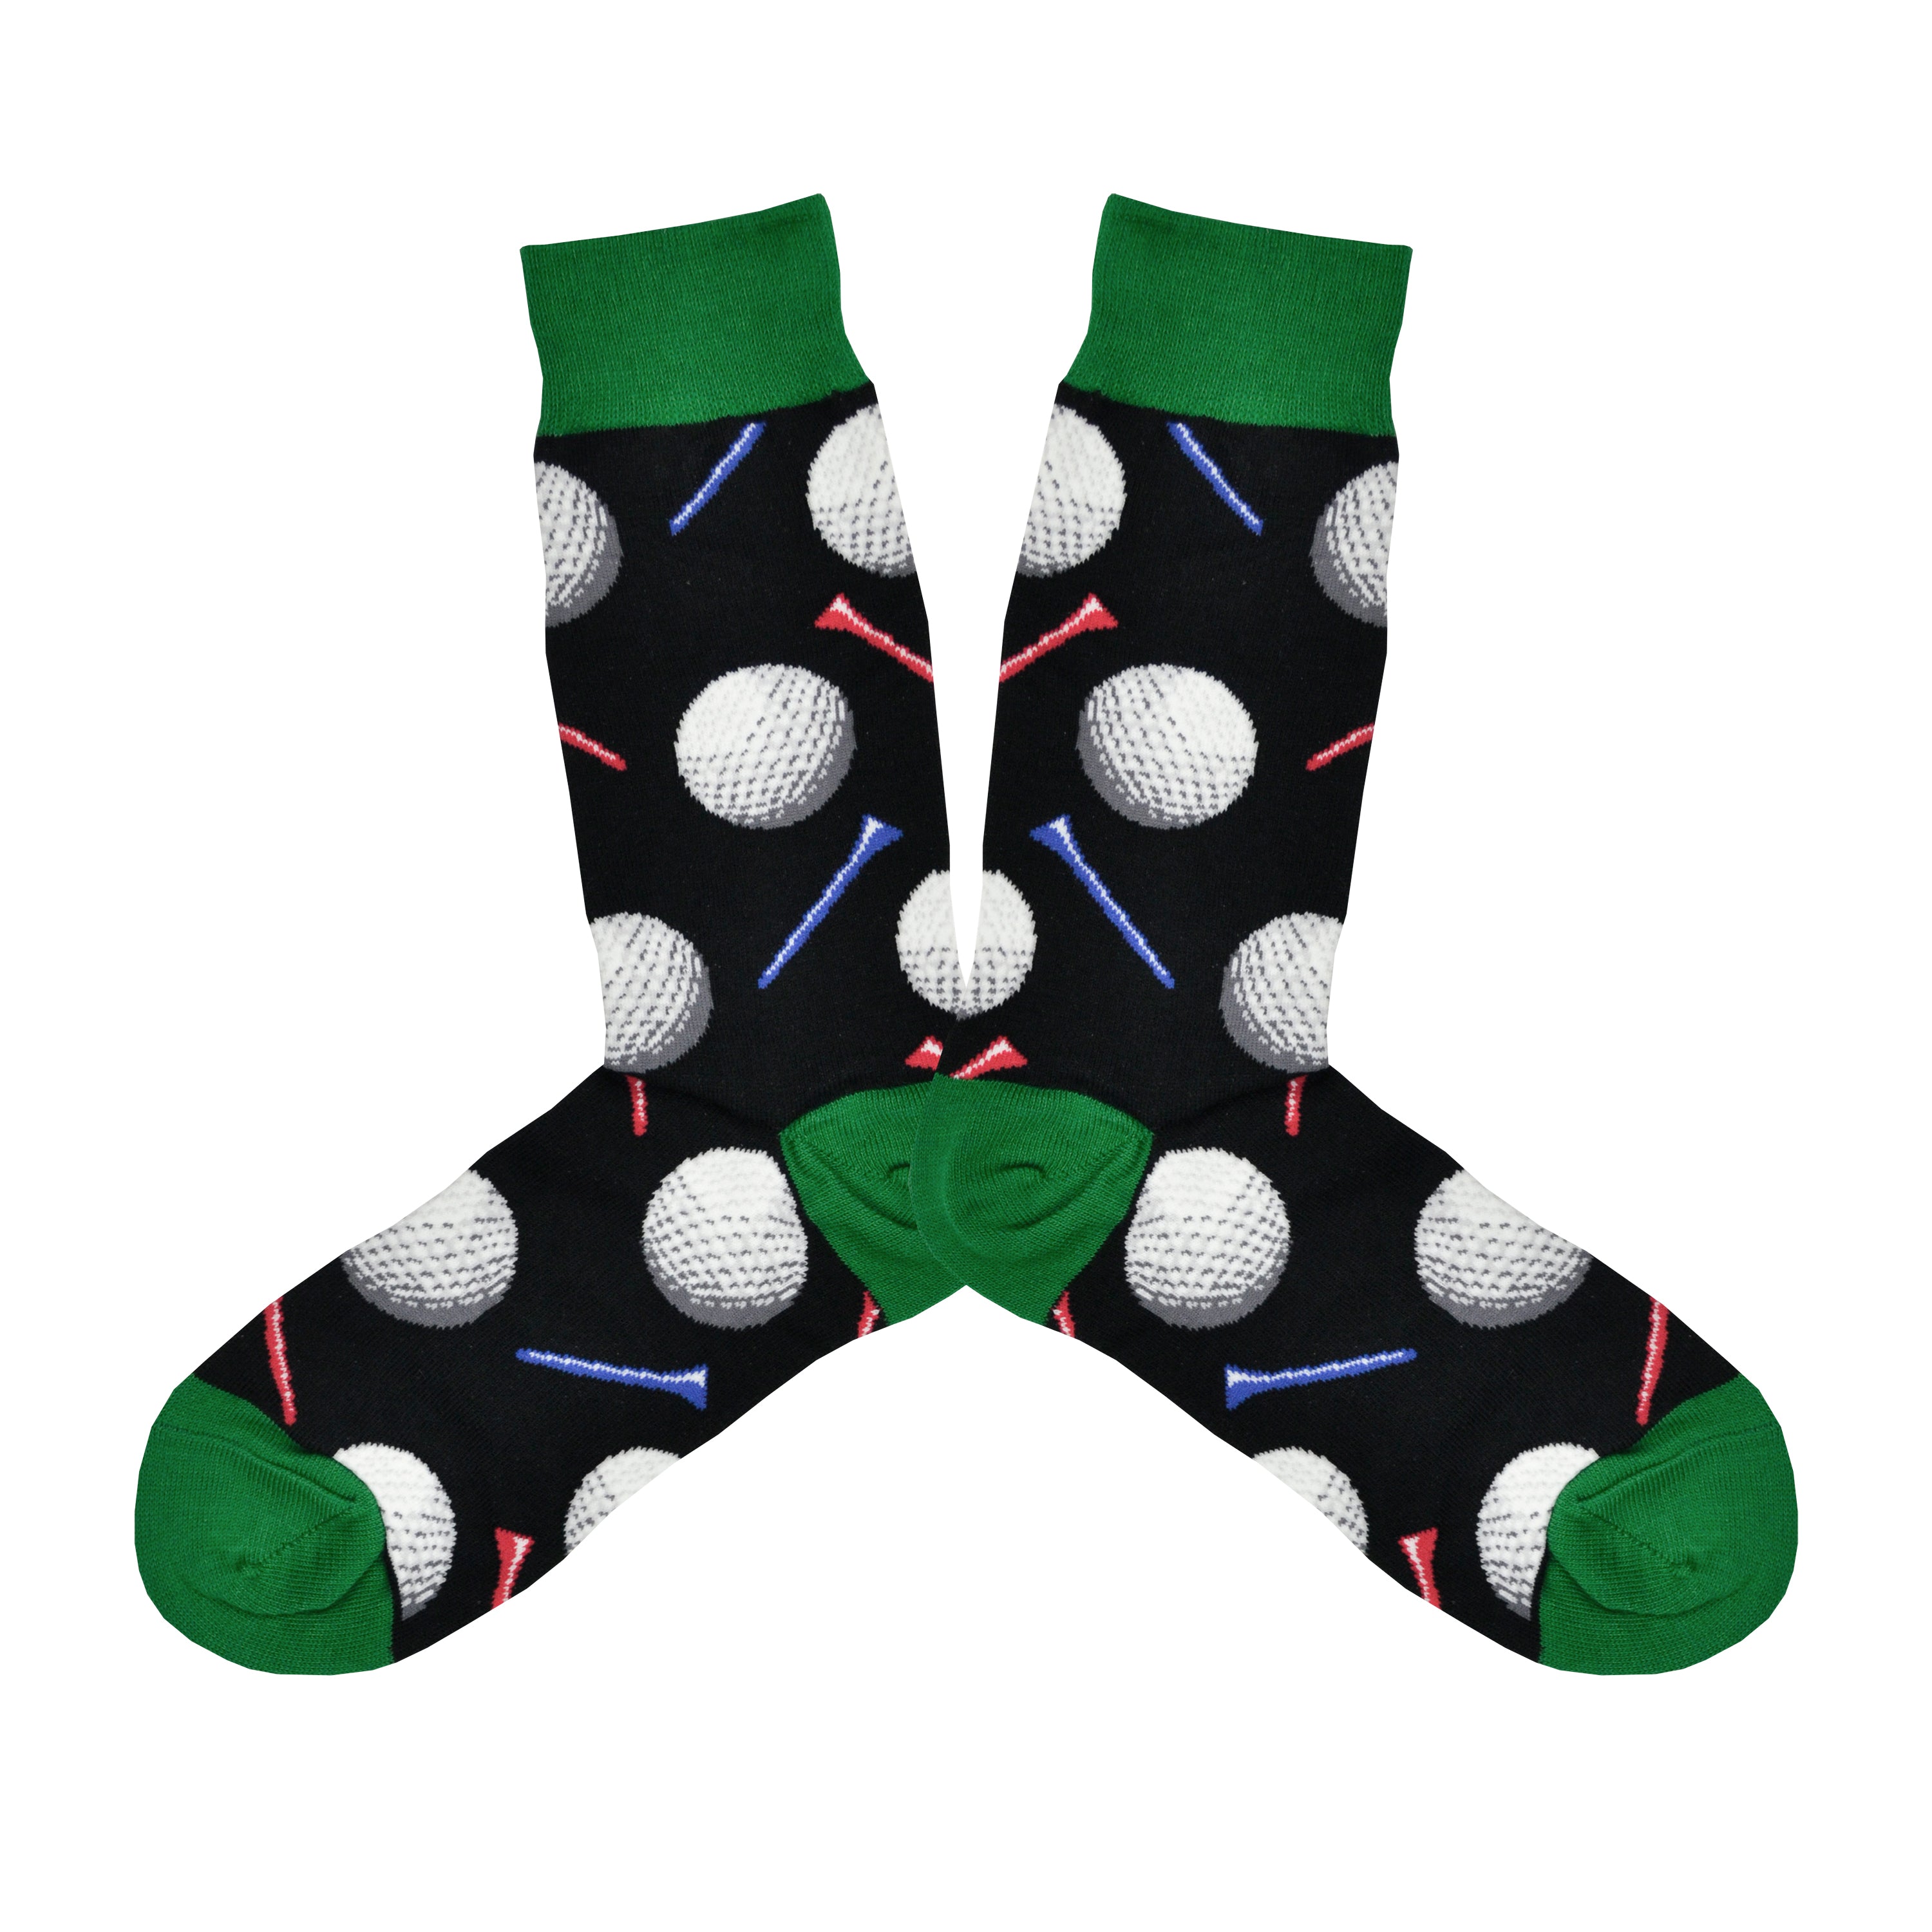 Shown in a flatlay, a pair of Socksmith's black cotton men's crew socks with dark green cuff/heel/toe and all-over pattern of golf balls and tees